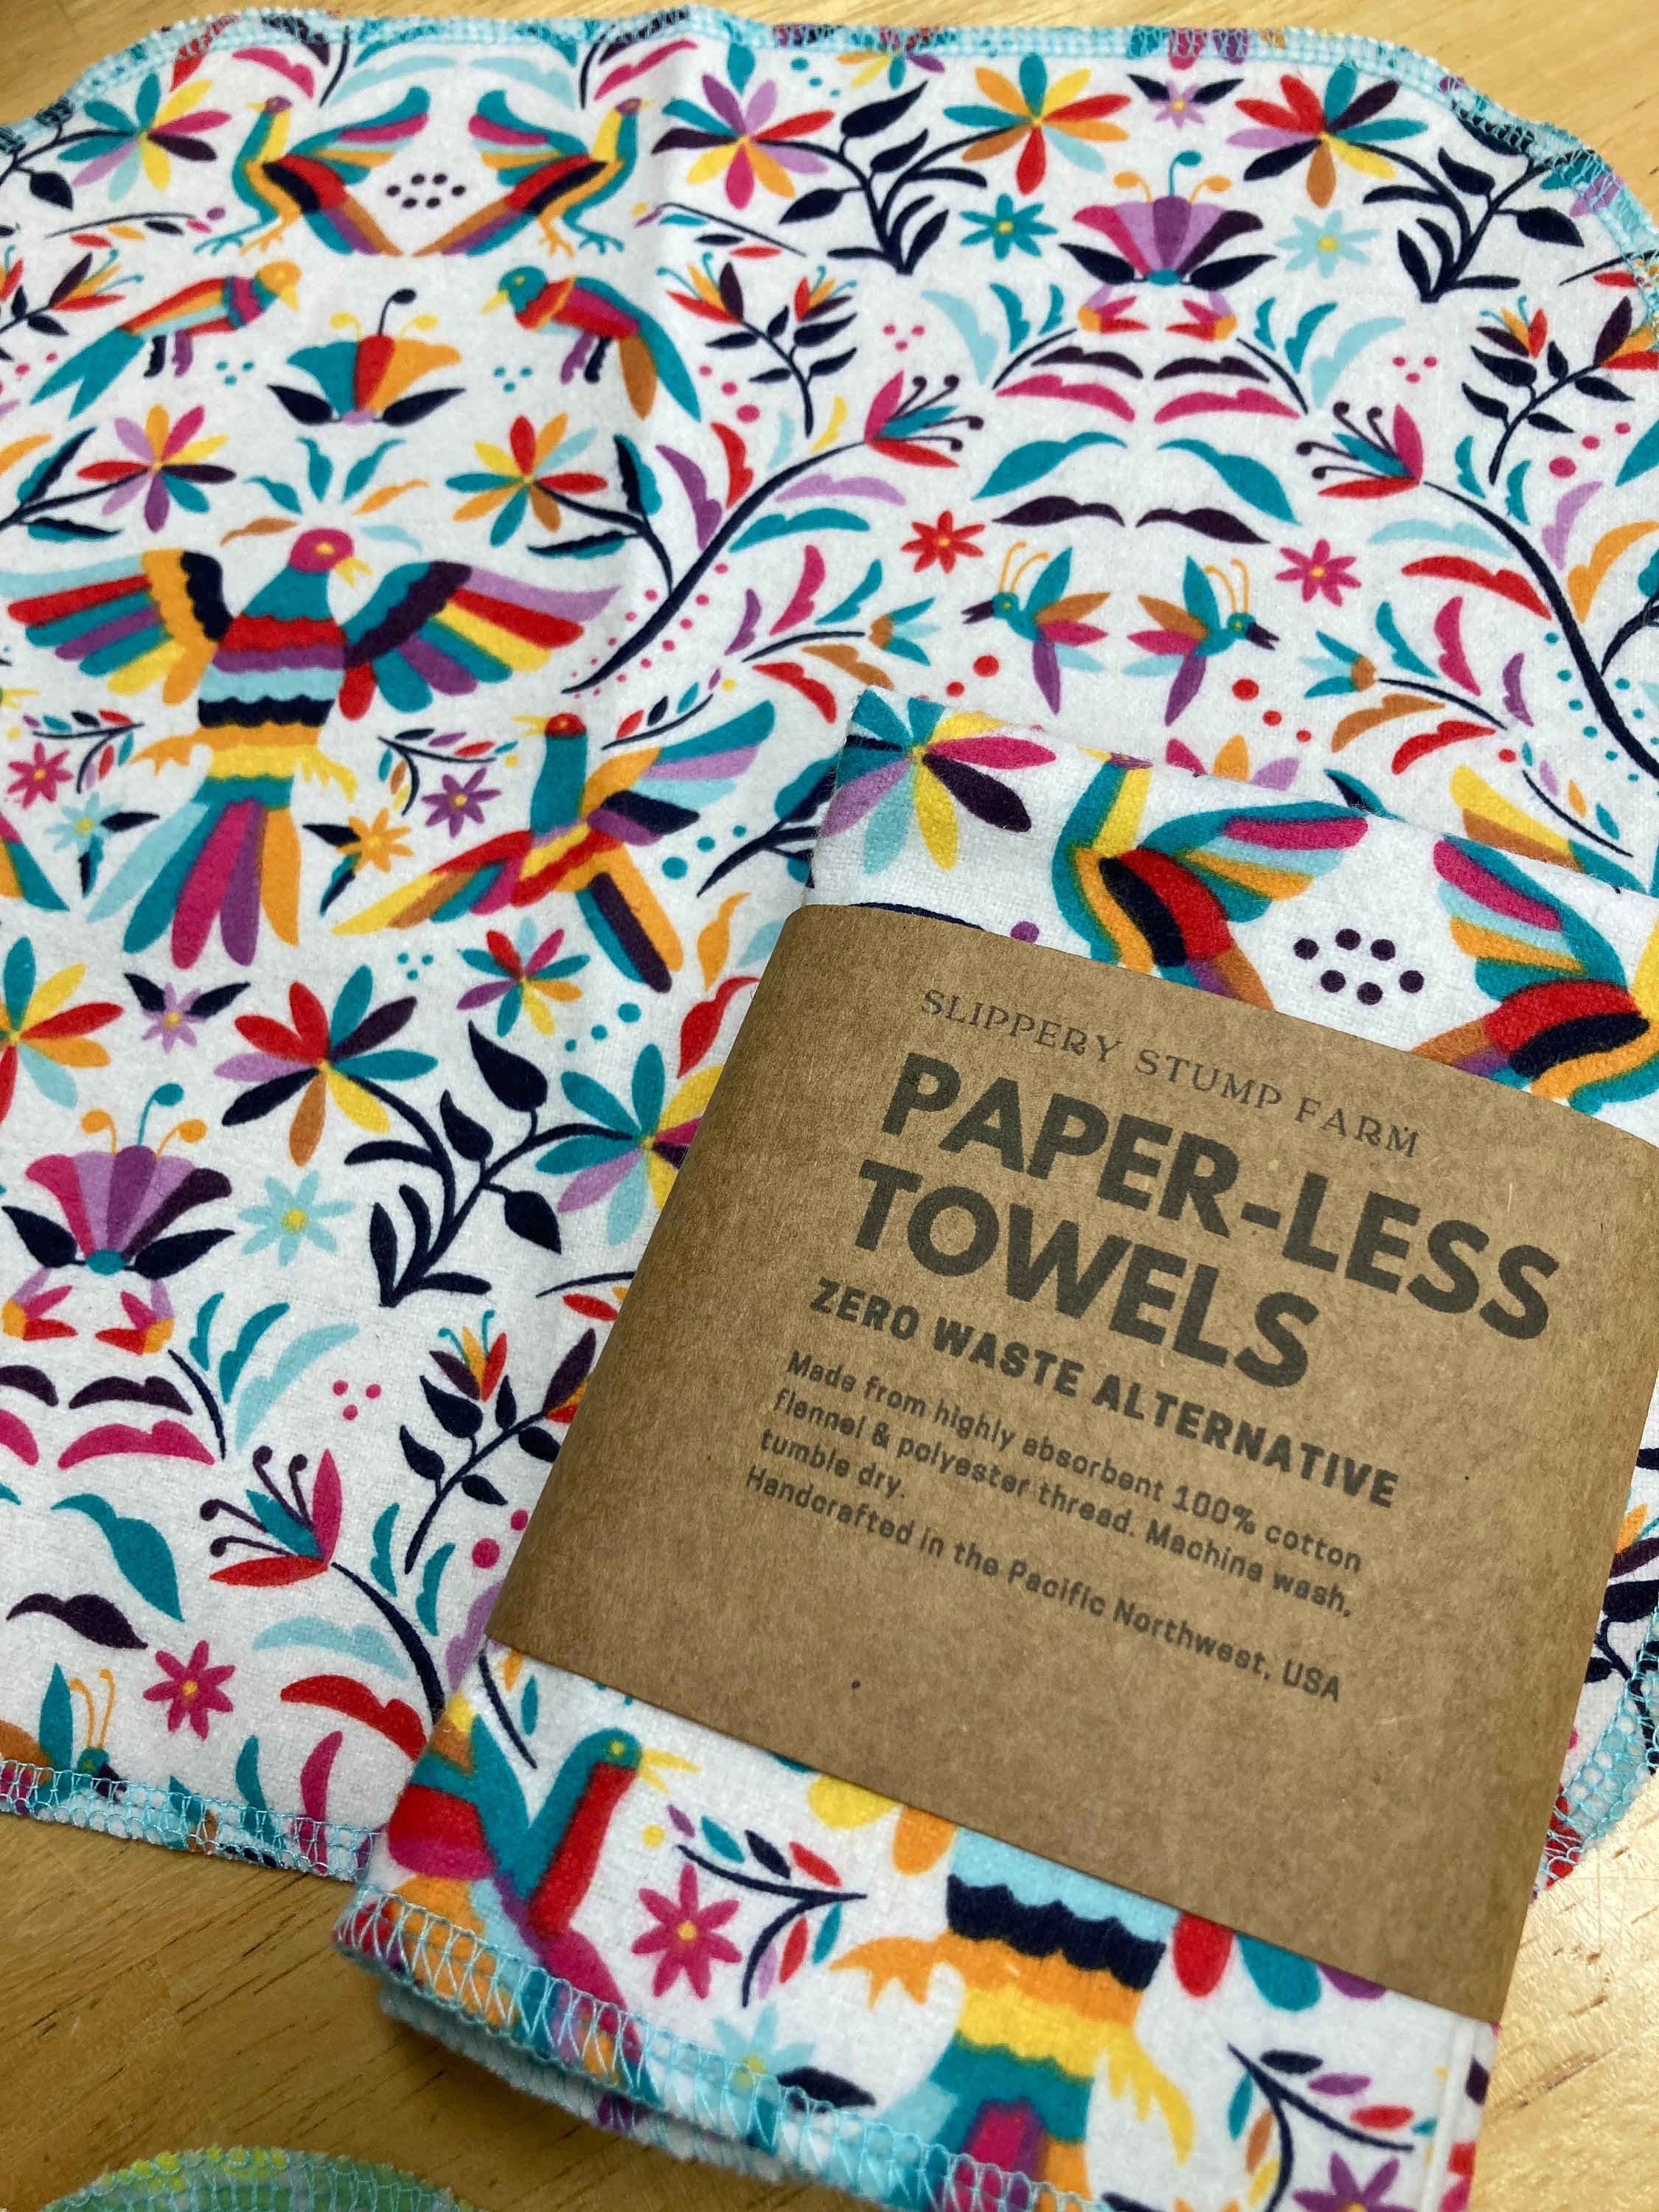 Poyday Reusable Paper Towels Washable: 100Pack Reusable Microfiber Towels  Roll Tear Away 12x12In Eco Friendly Cloth Paper Towels Alternative  Absorbent